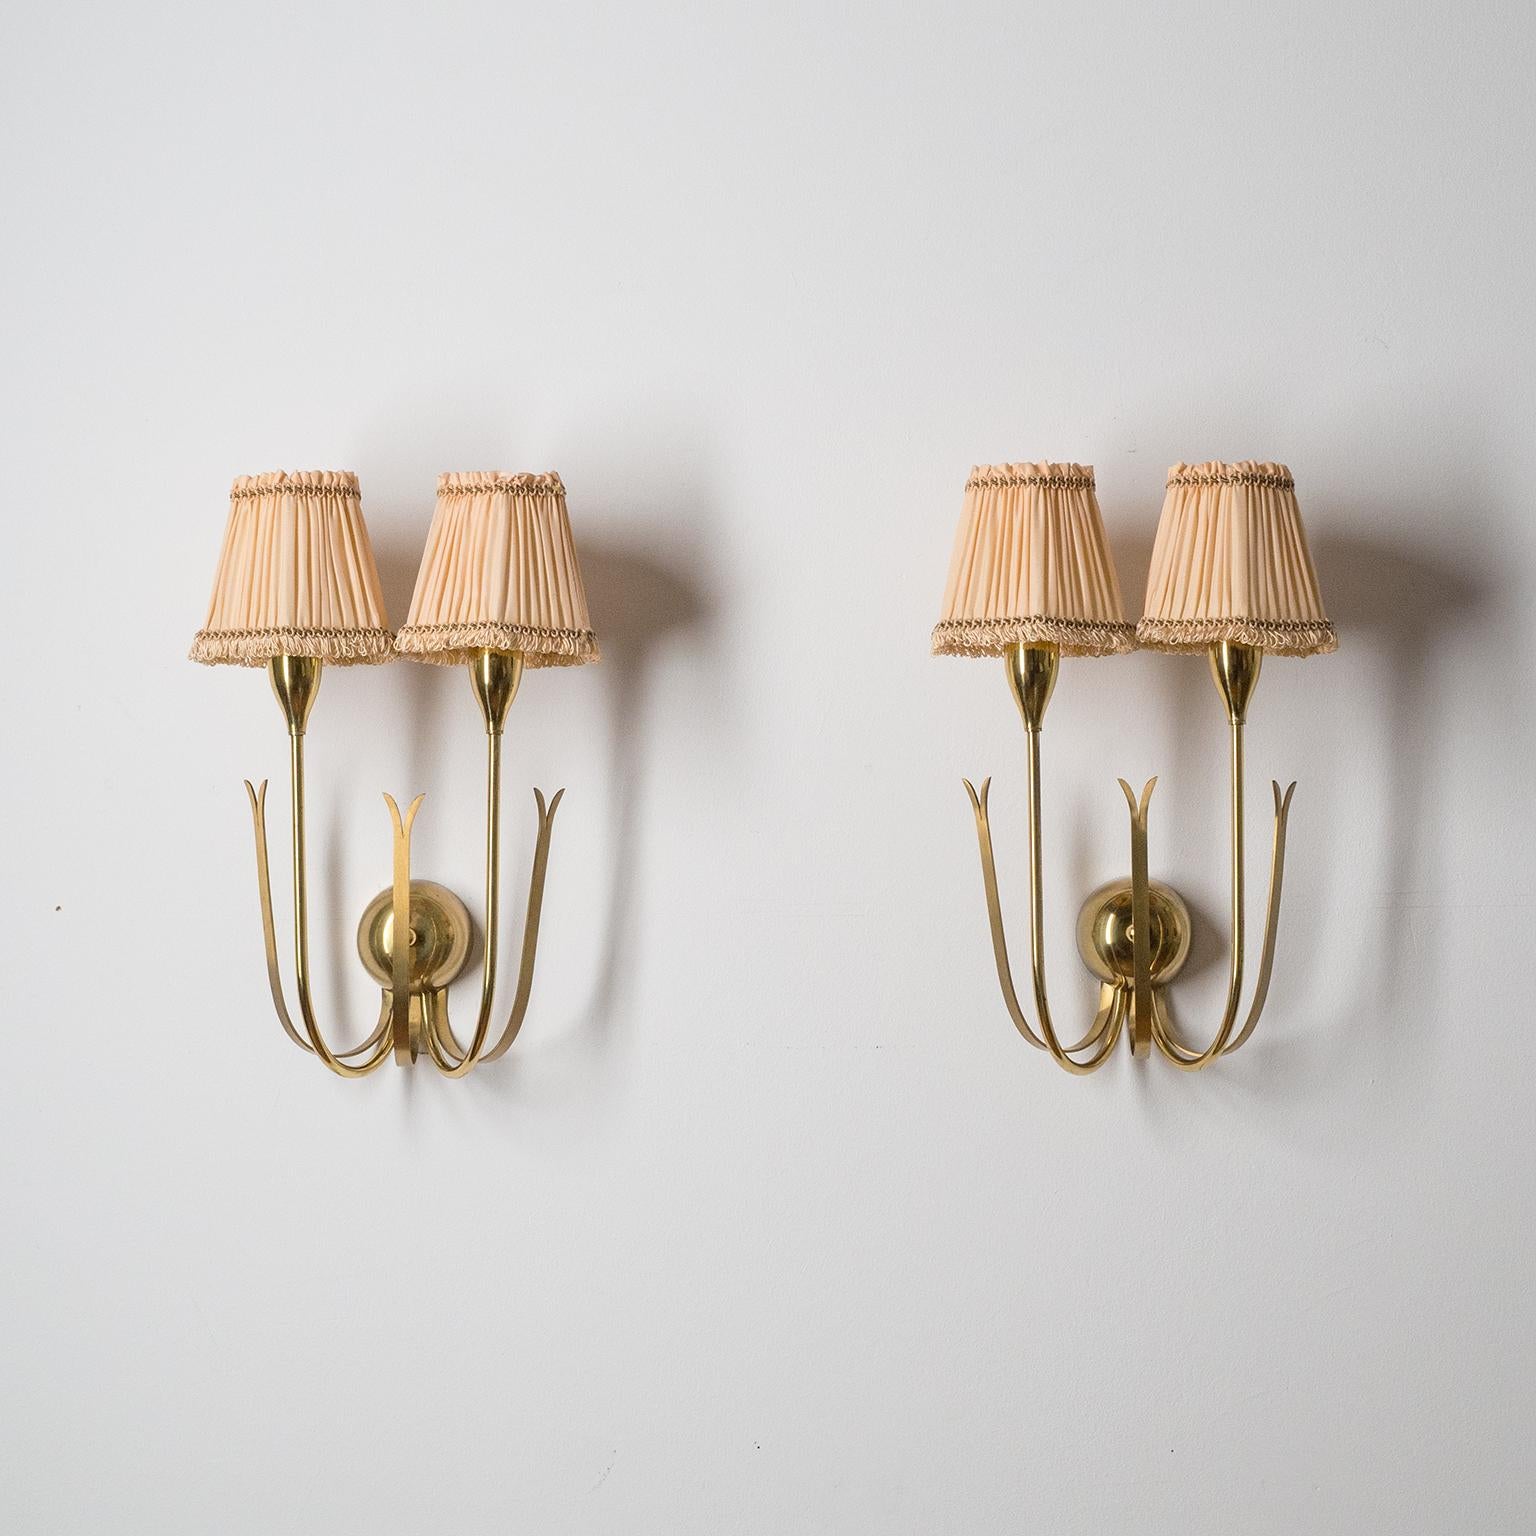 Pair of two-arm brass wall lights, late 1940s. Fine modernist design with a light Art Deco touch. The stems and the backplate cover are polished brass, while the three decorative elements have a brushed finish. Good original condition with light